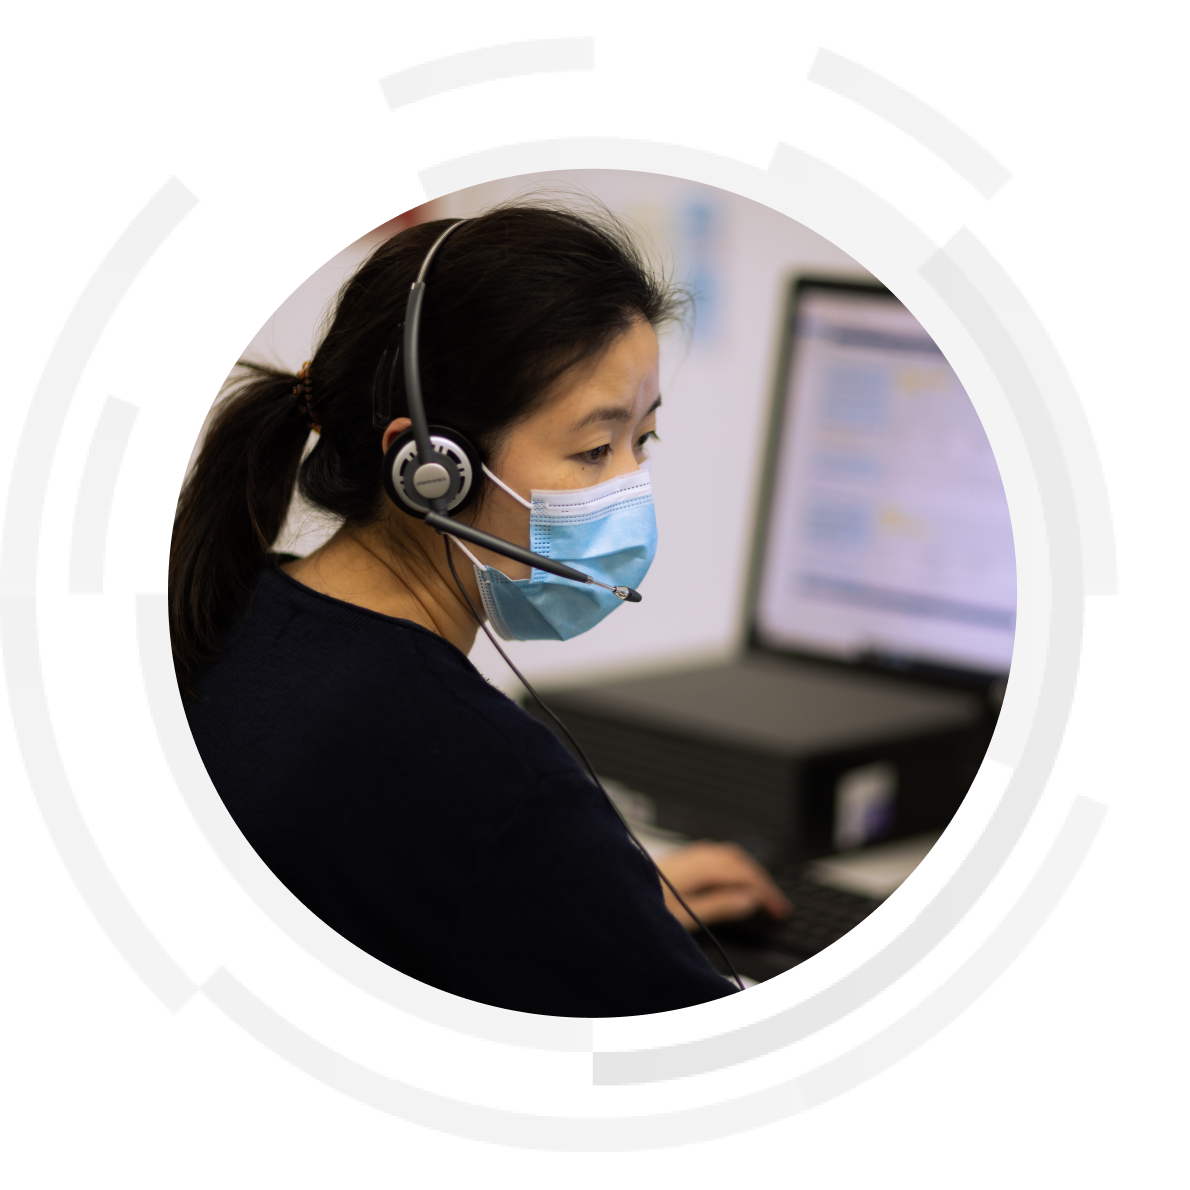 Nurse wearing headset and mask sitting at computer desk.